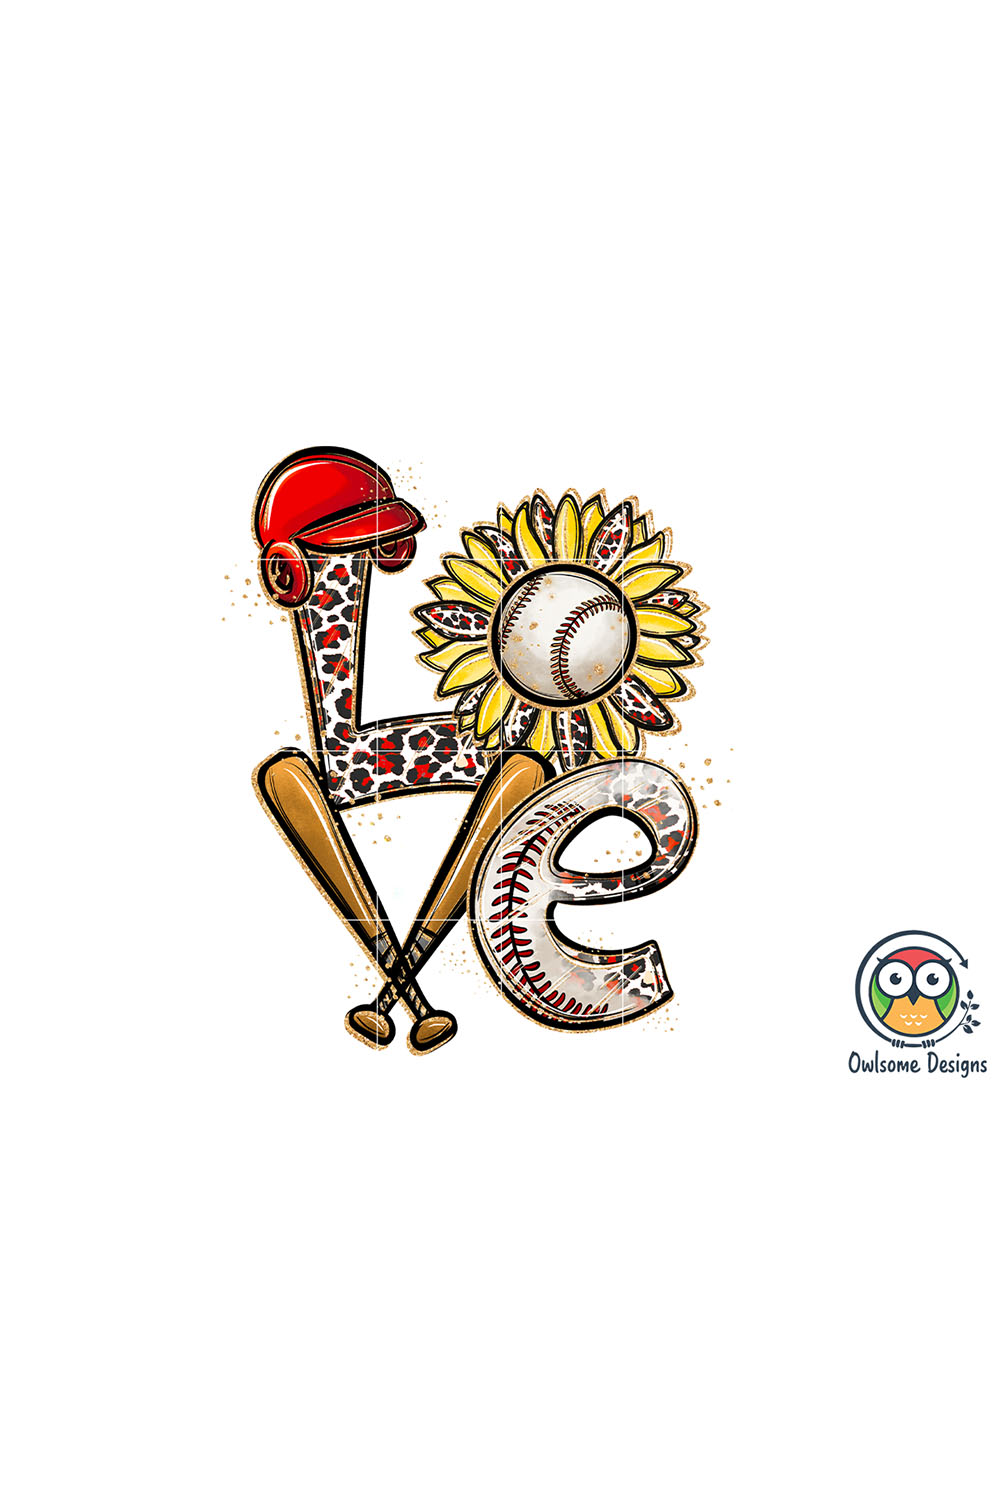 Image with a wonderful inscription love with baseball elements.